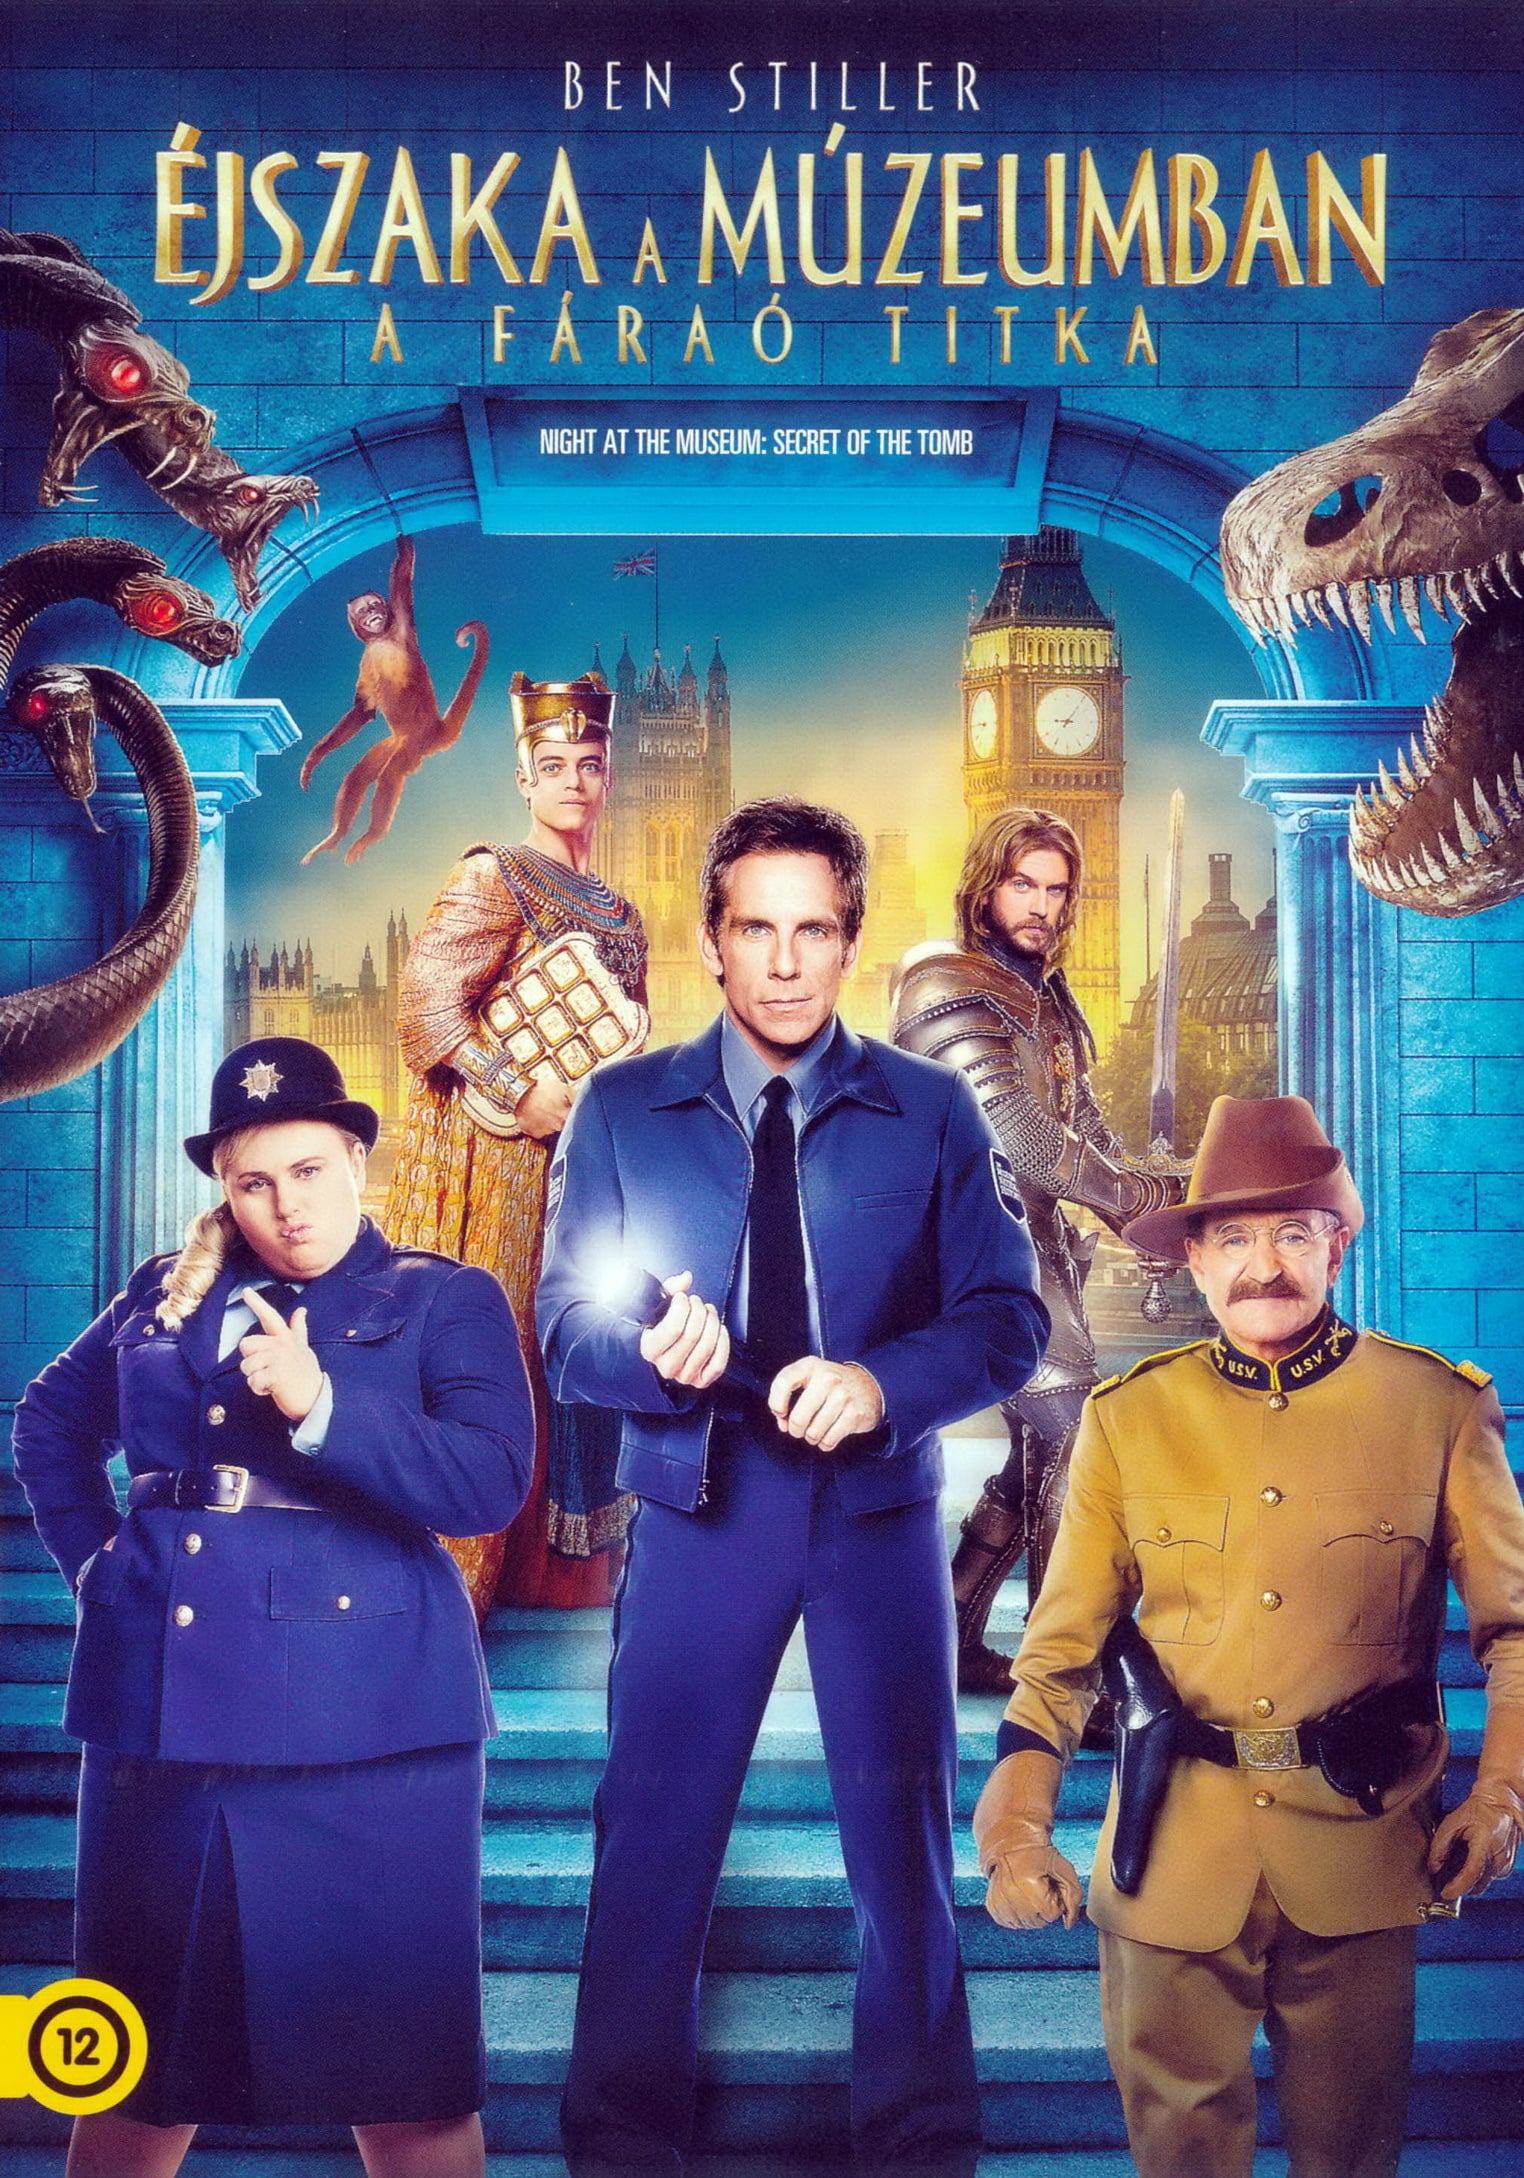 Night At The Museum 2 Full Movie In Hindi Download Hd - christianenergy